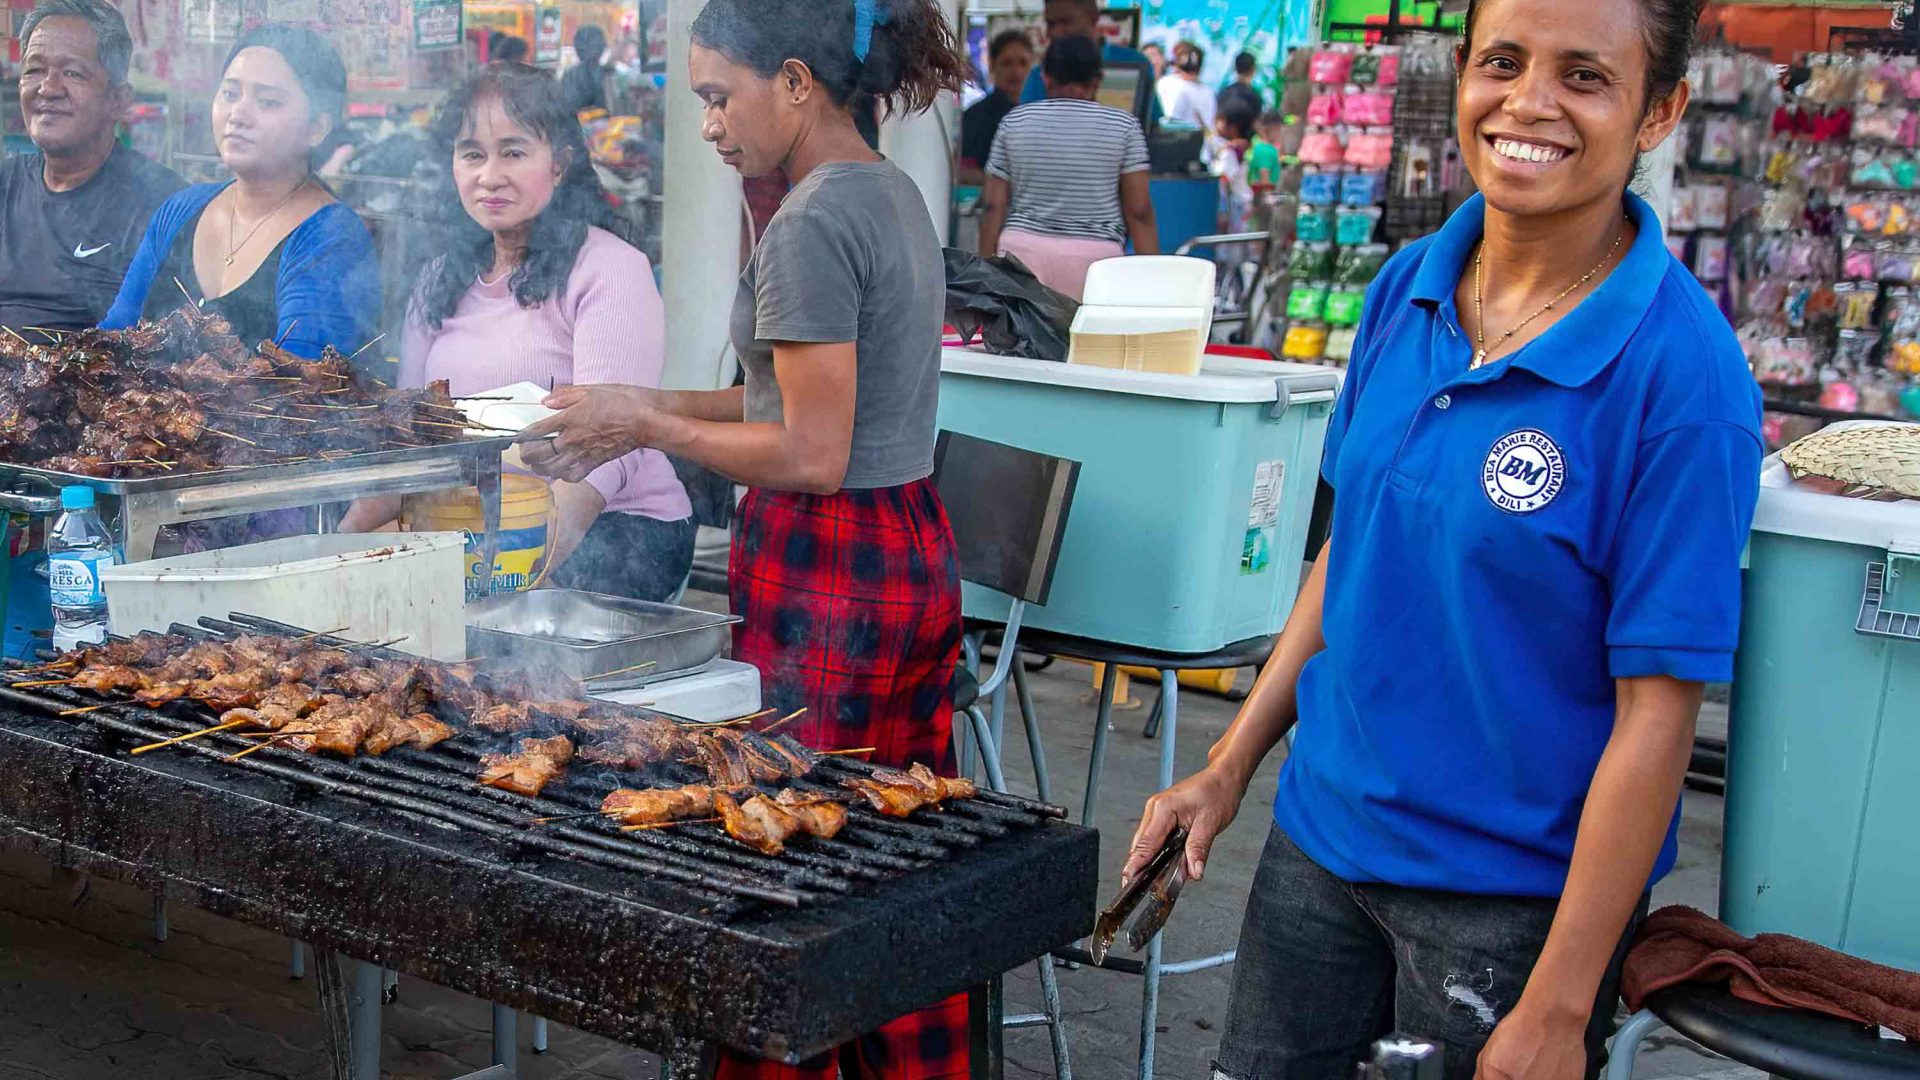 A man smiles as he BBQ's satay chicken at Timor Plaza night market.